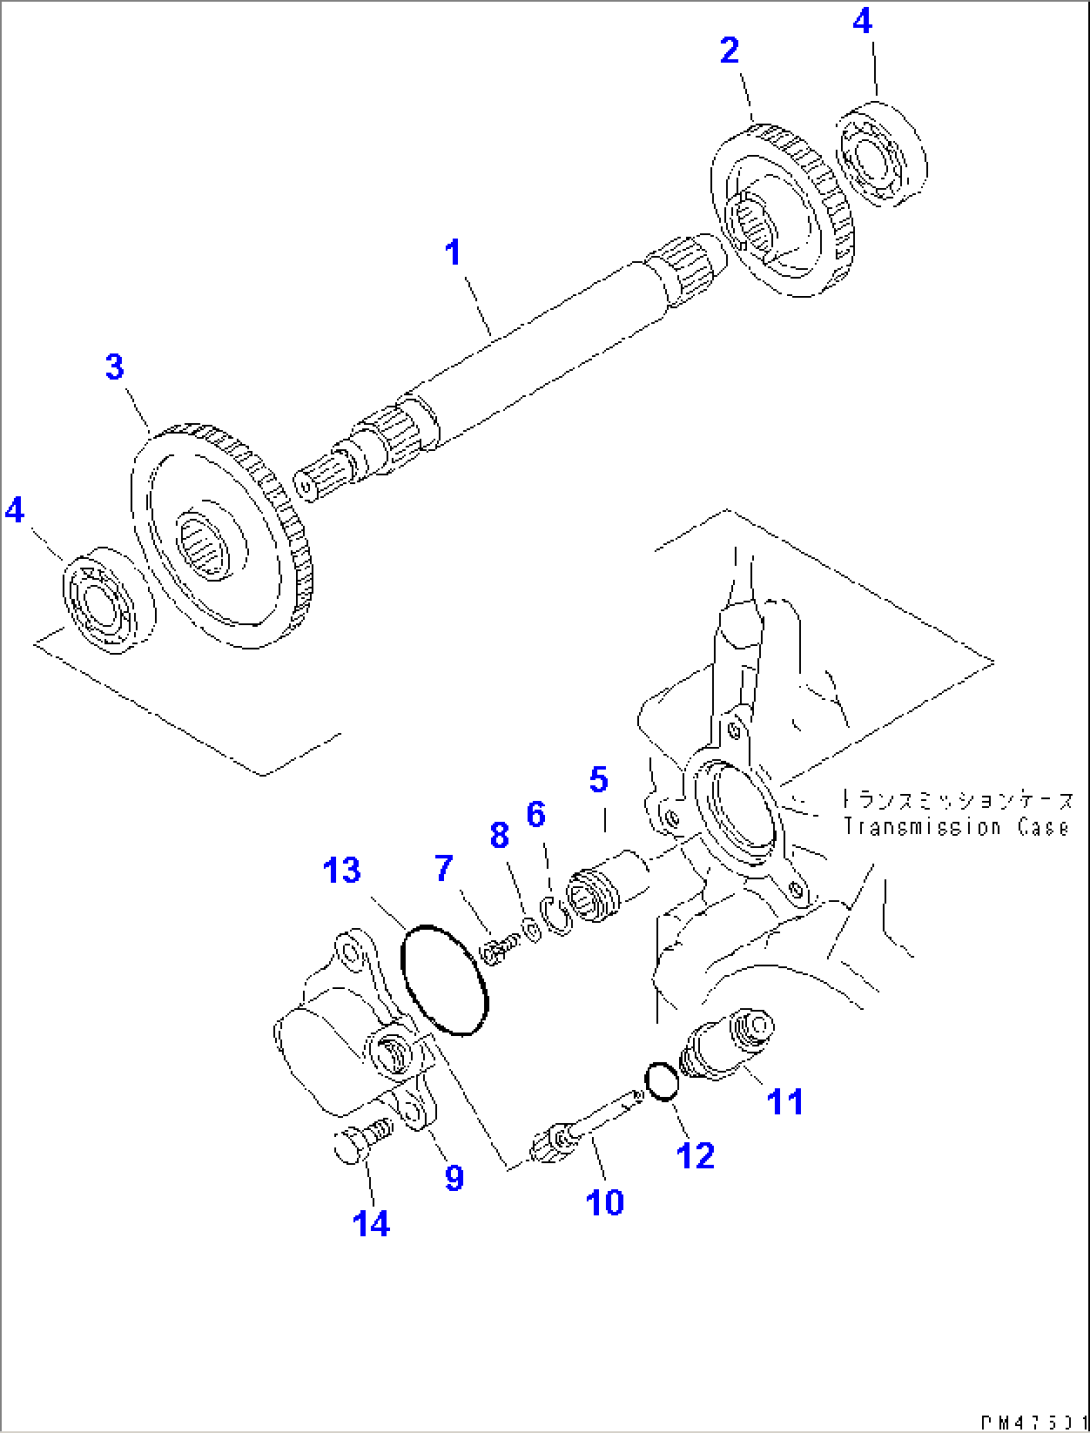 TRANSMISSION (3RD AND 4TH GEAR)(#50001-)